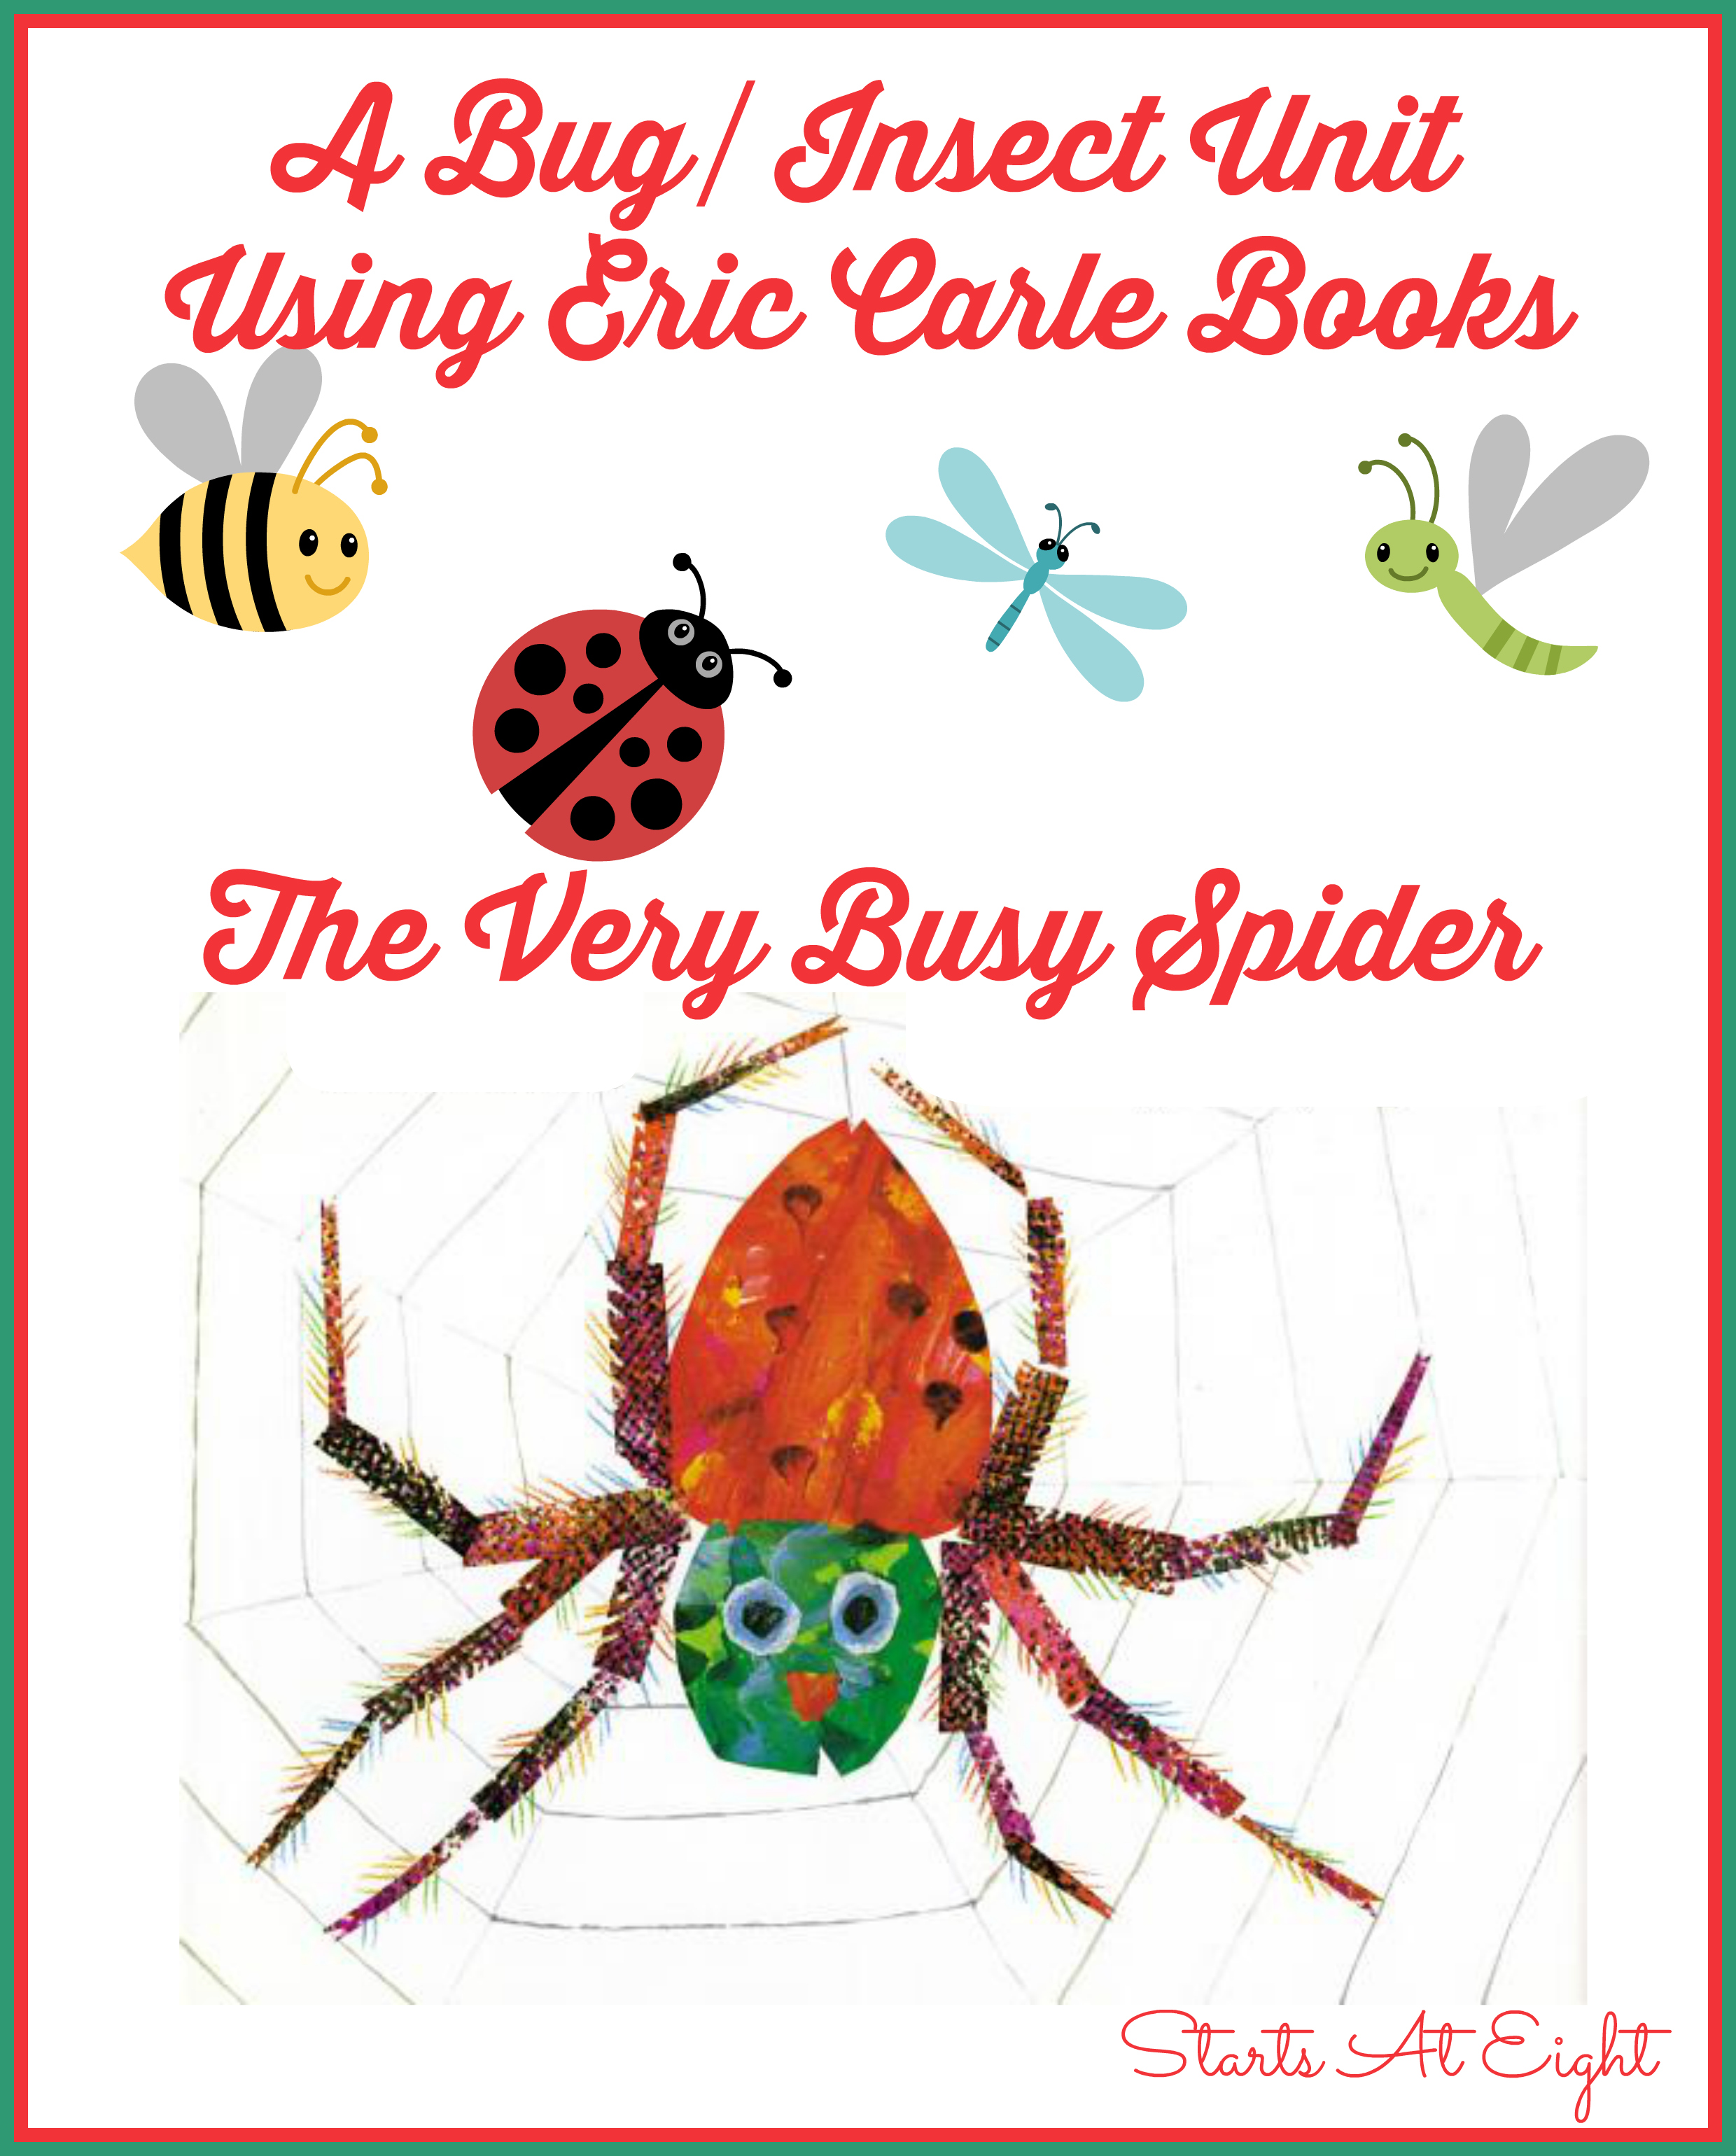 A Bug/Insect Unit Using Eric Carle Books ~ The Very Busy Spider